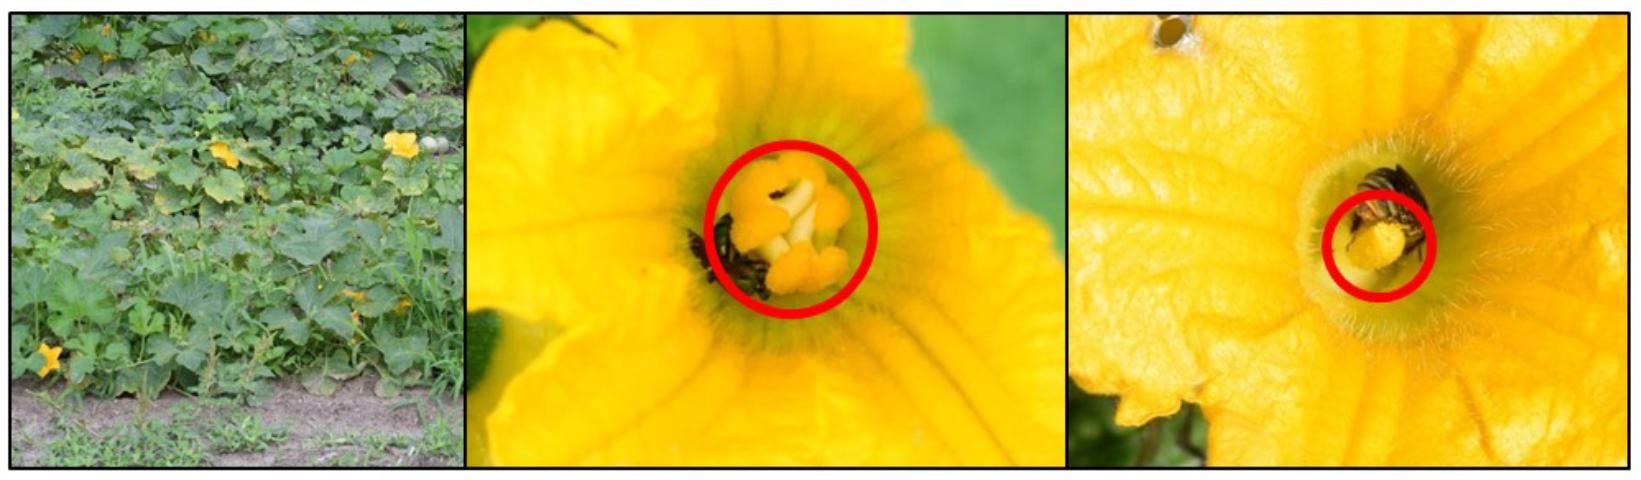 Figure 1. A squash field in bloom (left), a female flower (center), and a male flower (right). Flower reproductive organs that can be used to sex flowers are circled in red.